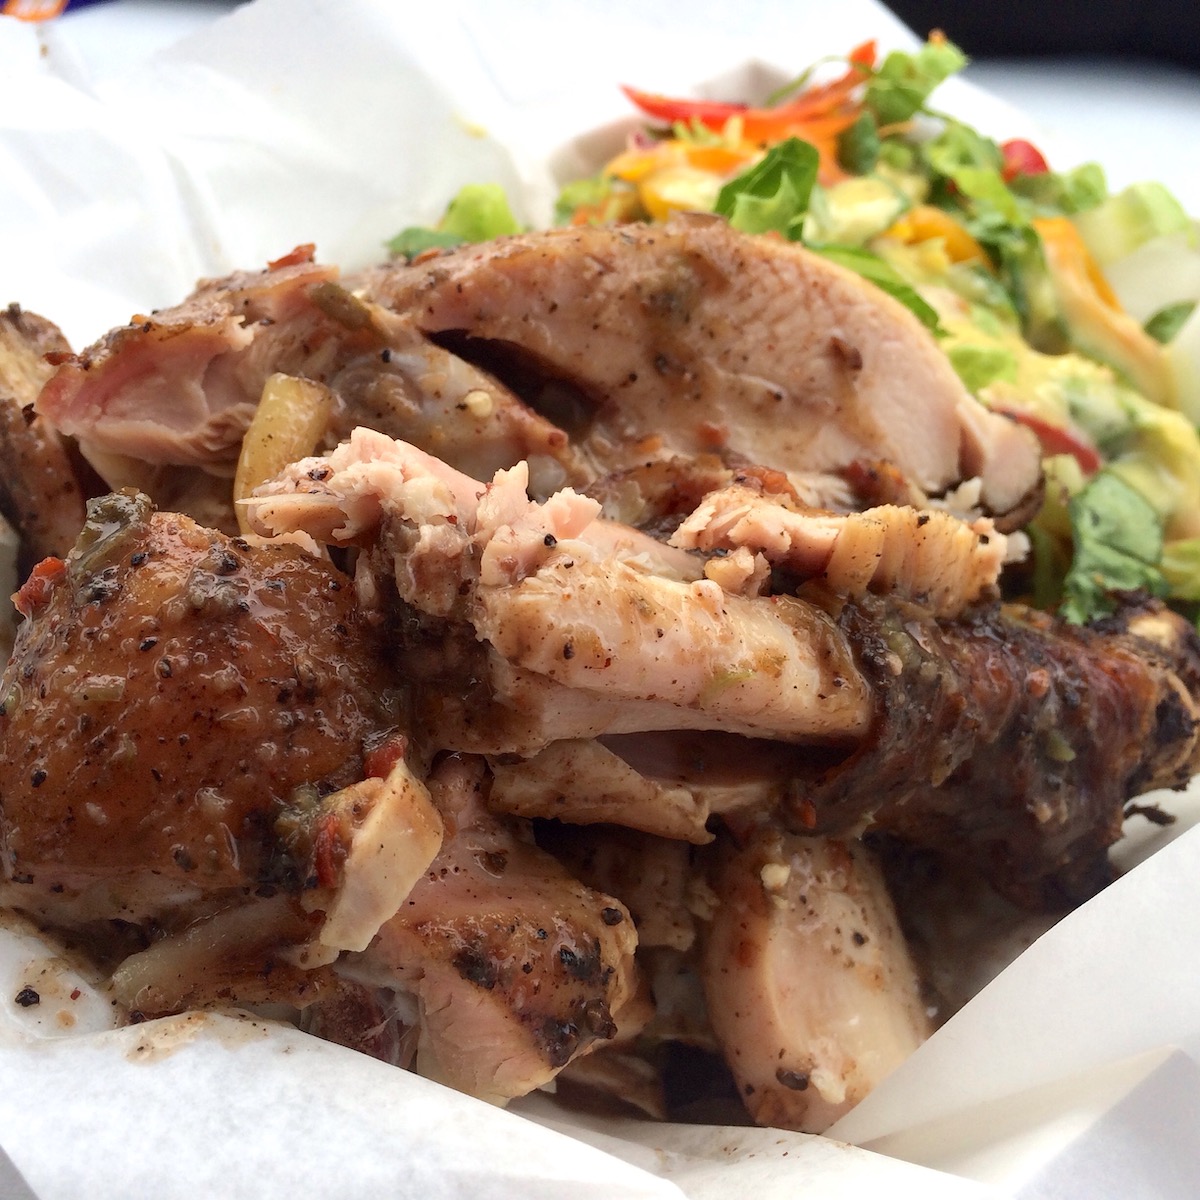 Jerk Chicken with Summer Salad from Flavor House Grill Food Truck